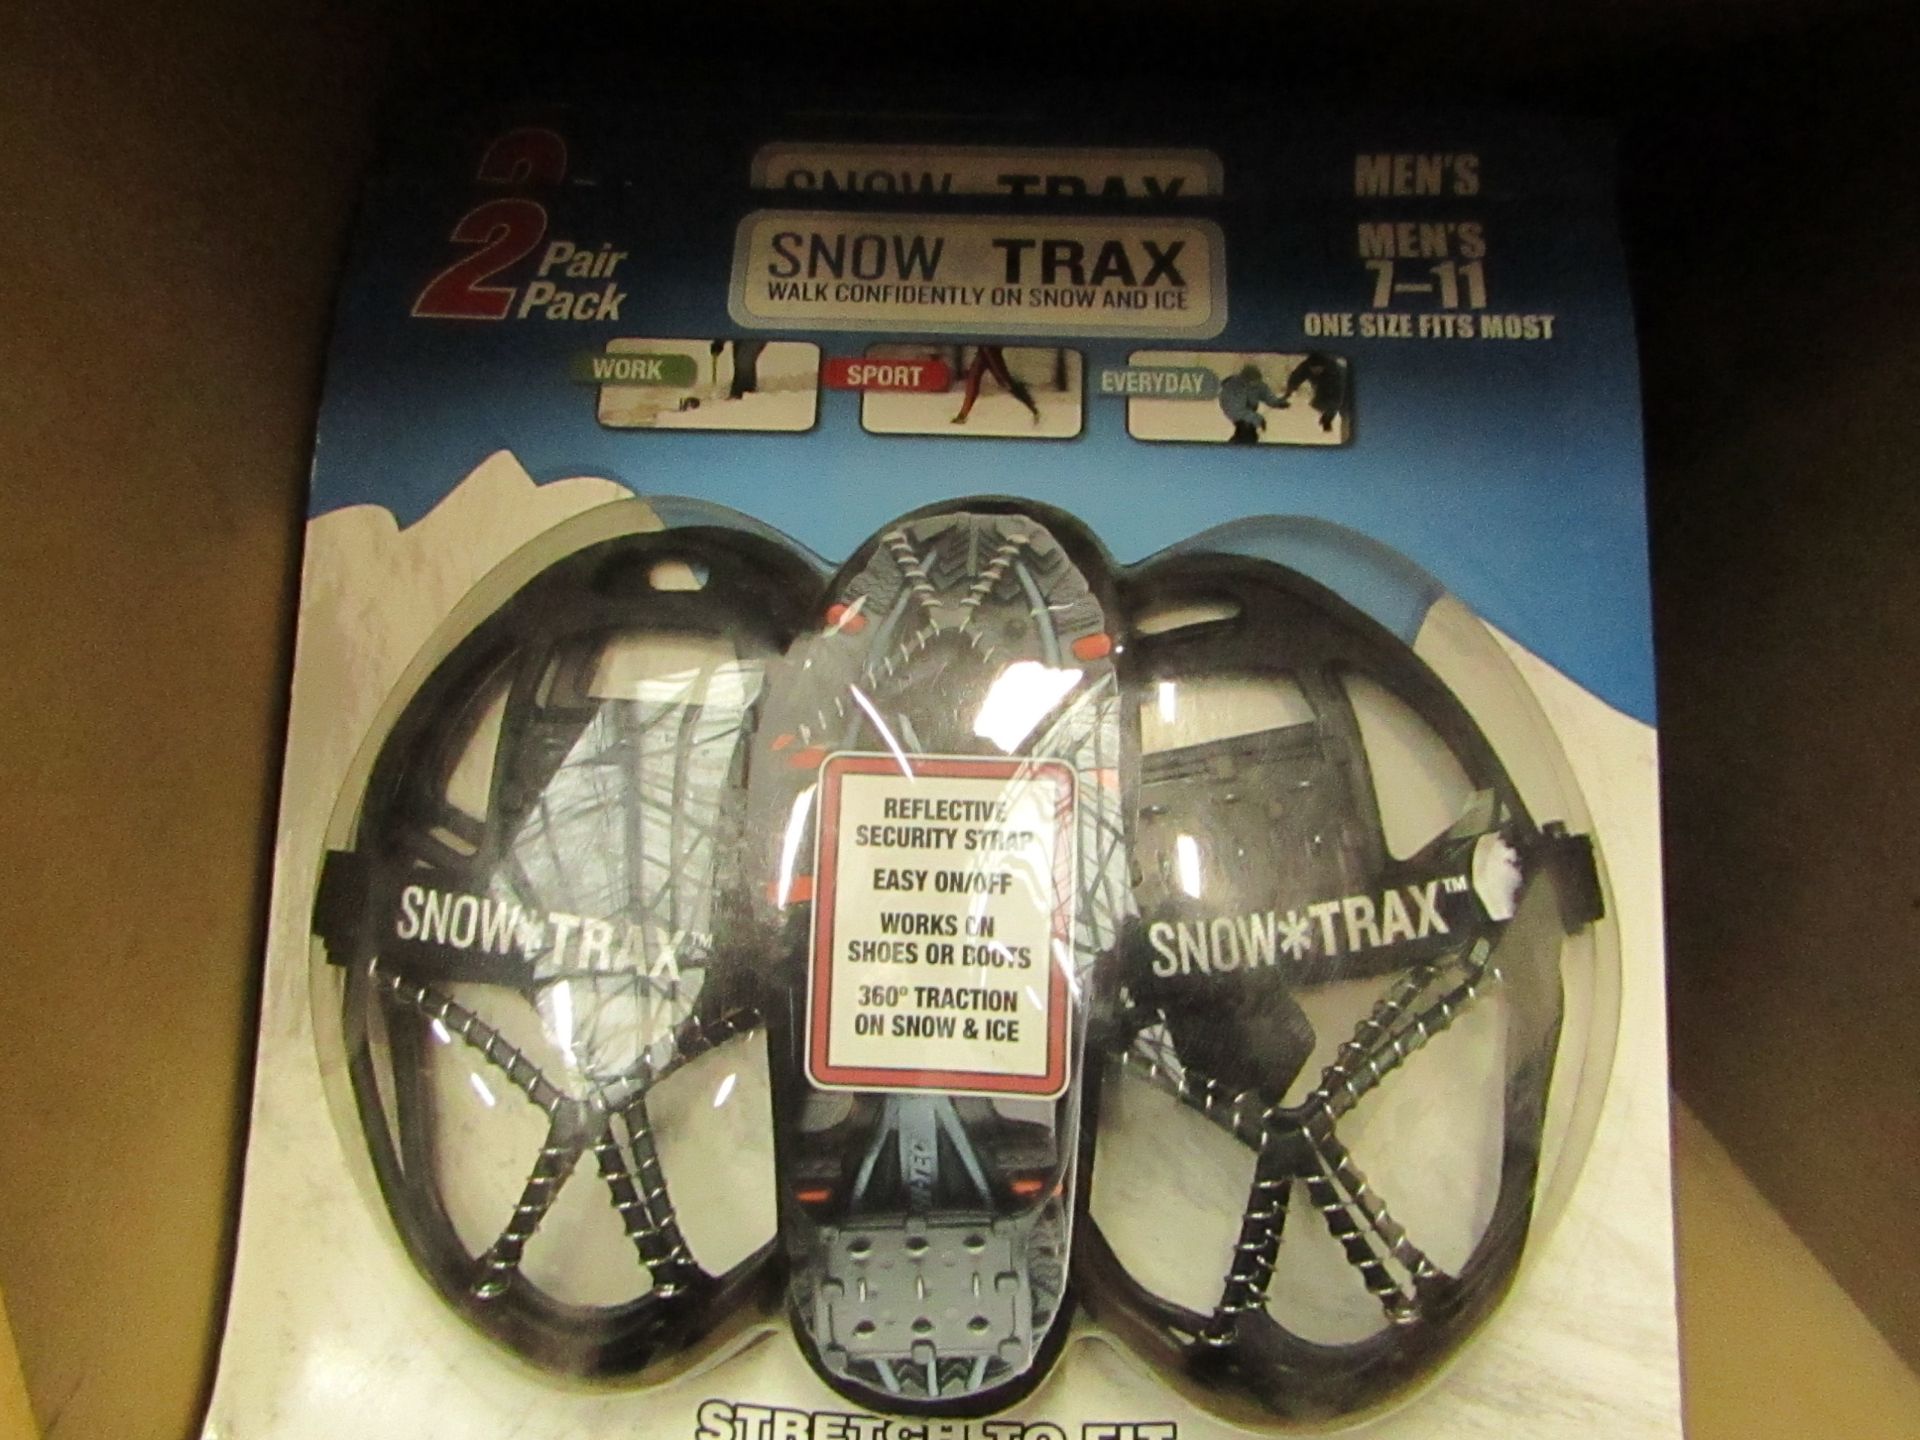 Snow Trax snow grips, 7 - 11, new and packaged.